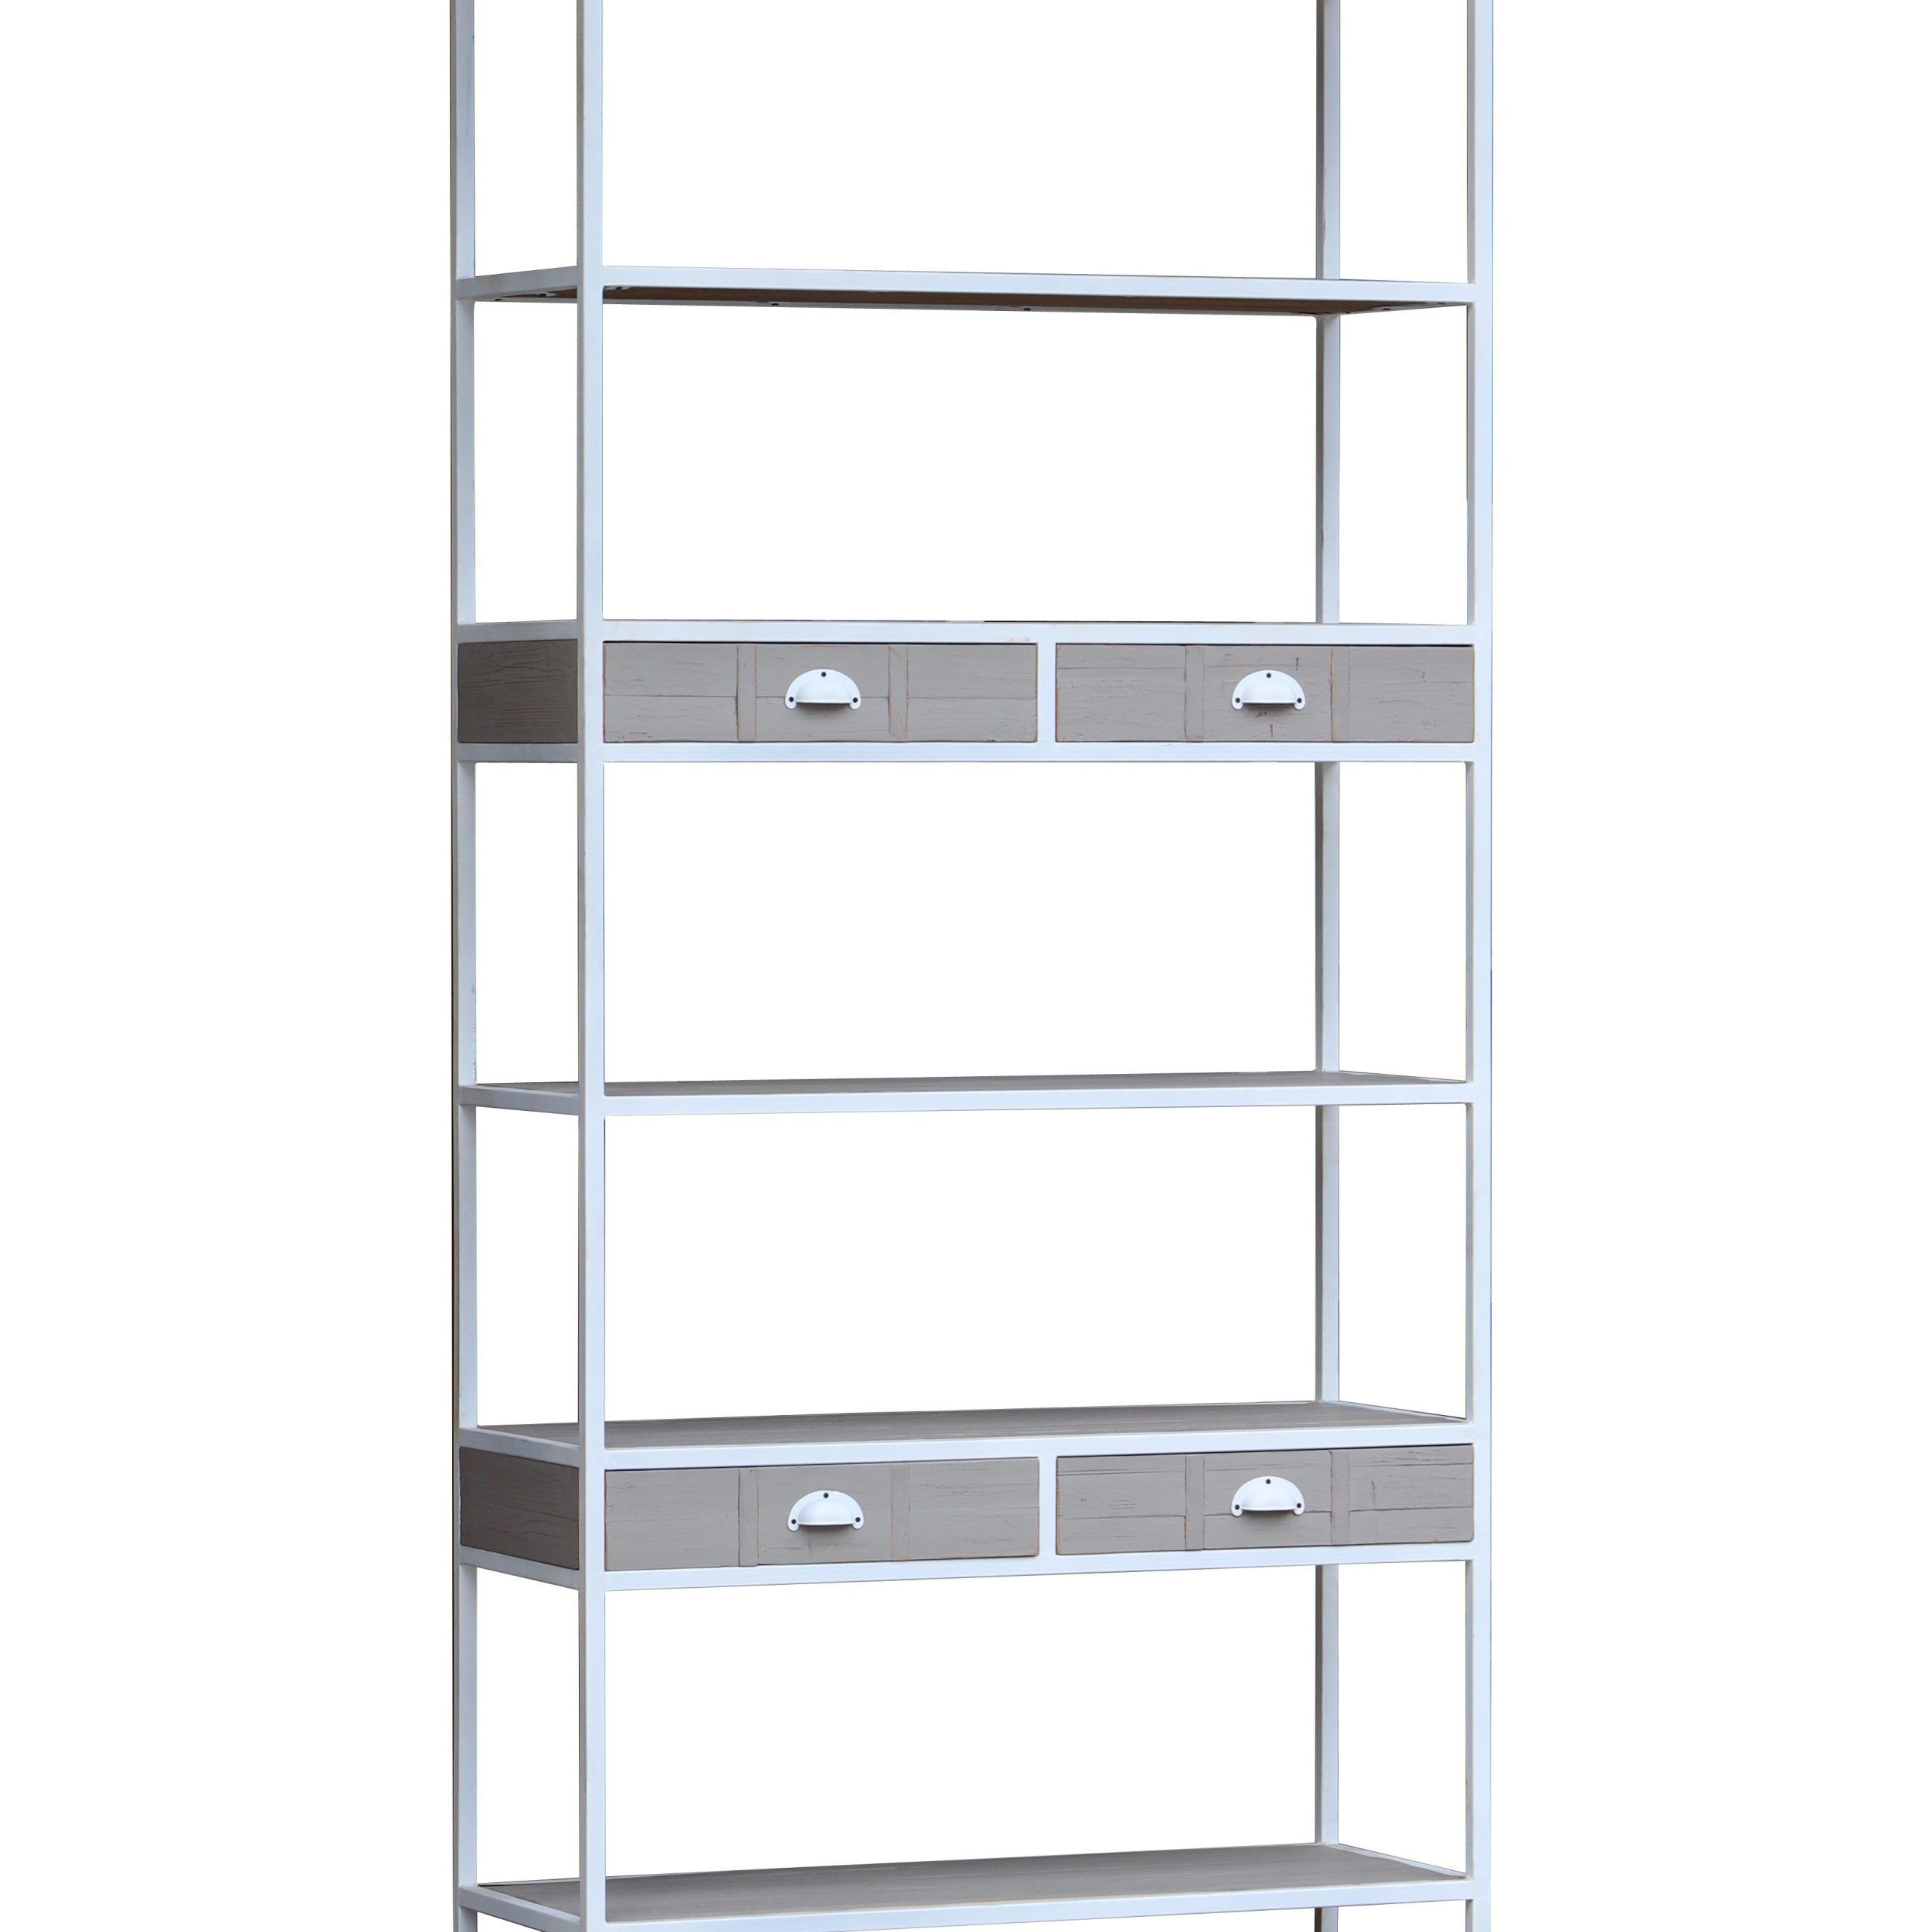 Galleryclassicsinc 85'' H Iron Bookcase | Wayfair In Square Iron Bookcases (View 13 of 15)